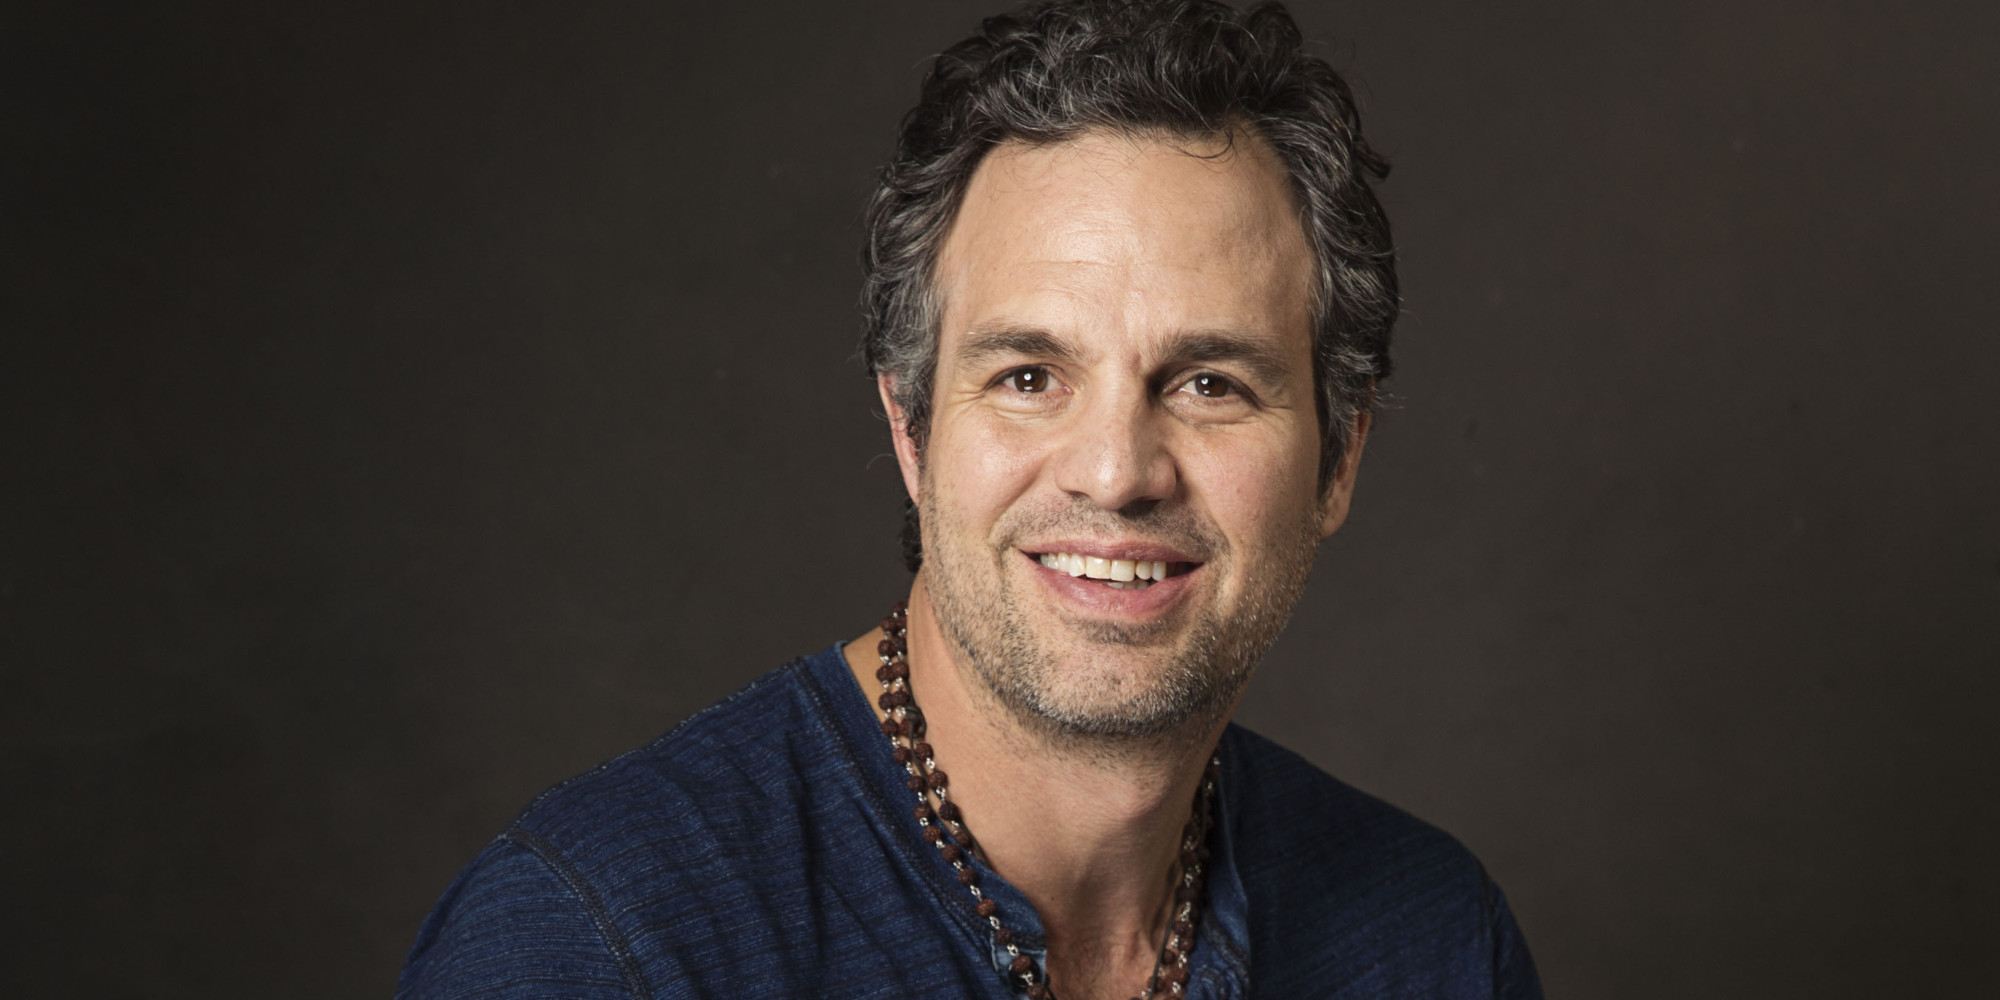 In this Sunday, Jan. 19, 2014 photo, actor Mark Ruffalo of the film, "Infinitely Polar Bear" poses for a portrait at The Collective and Gibson Lounge Powered by CEG, during the Sundance Film Festival, in Park City, Utah. The film starring Ruffalo, Zoe Saldana, and Keir Dullea, premiered at the 2014 Sundance Film Festival. (Photo by Victoria Will/Invision/AP)